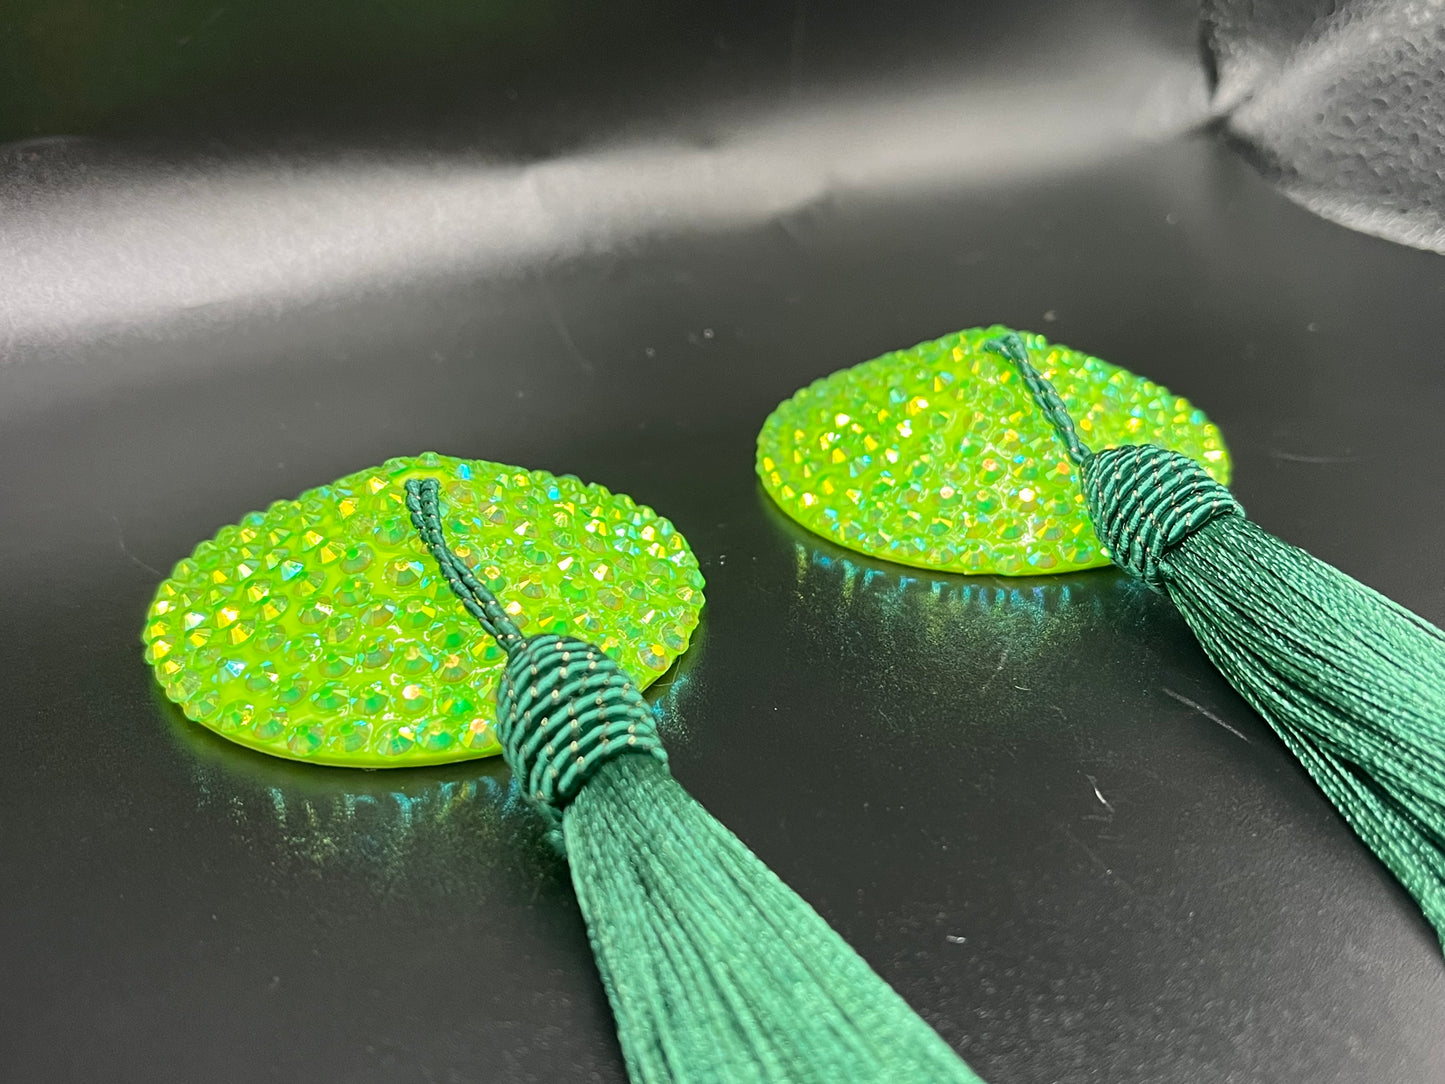 Lime Green Pasties with Tassels